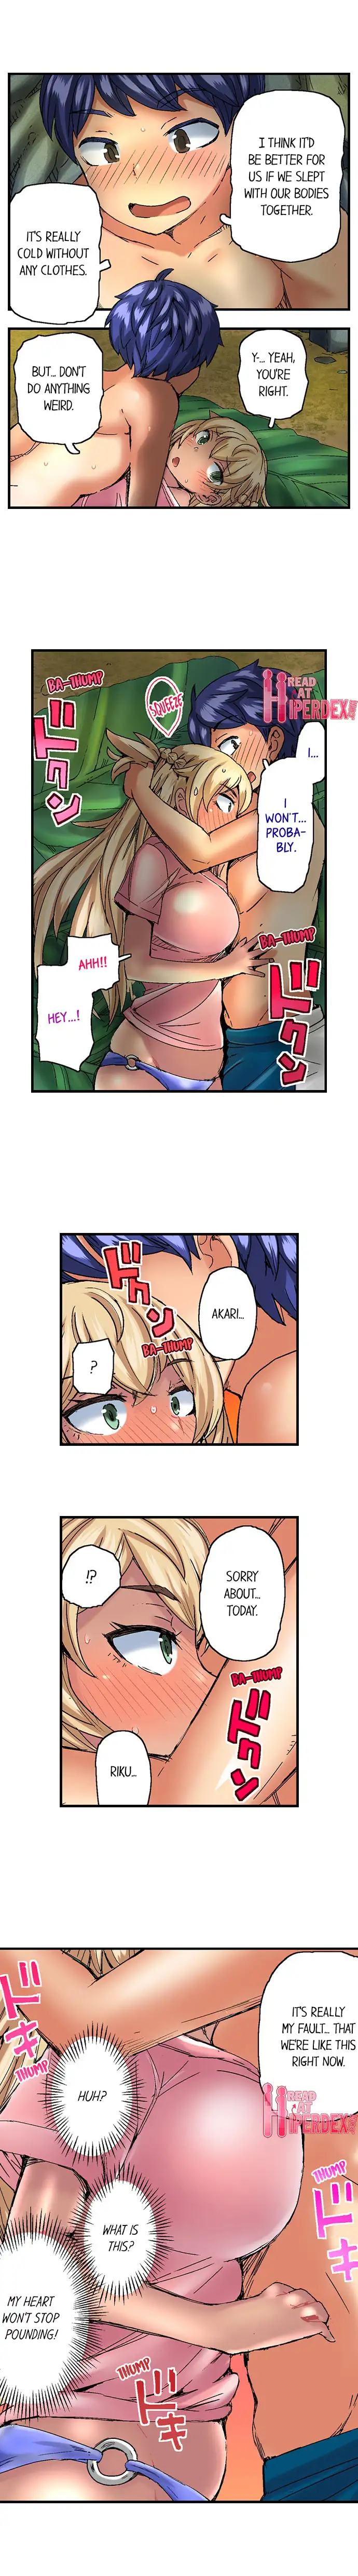 Taking a Hot Tanned Chick’s Virginity - Chapter 10 Page 7